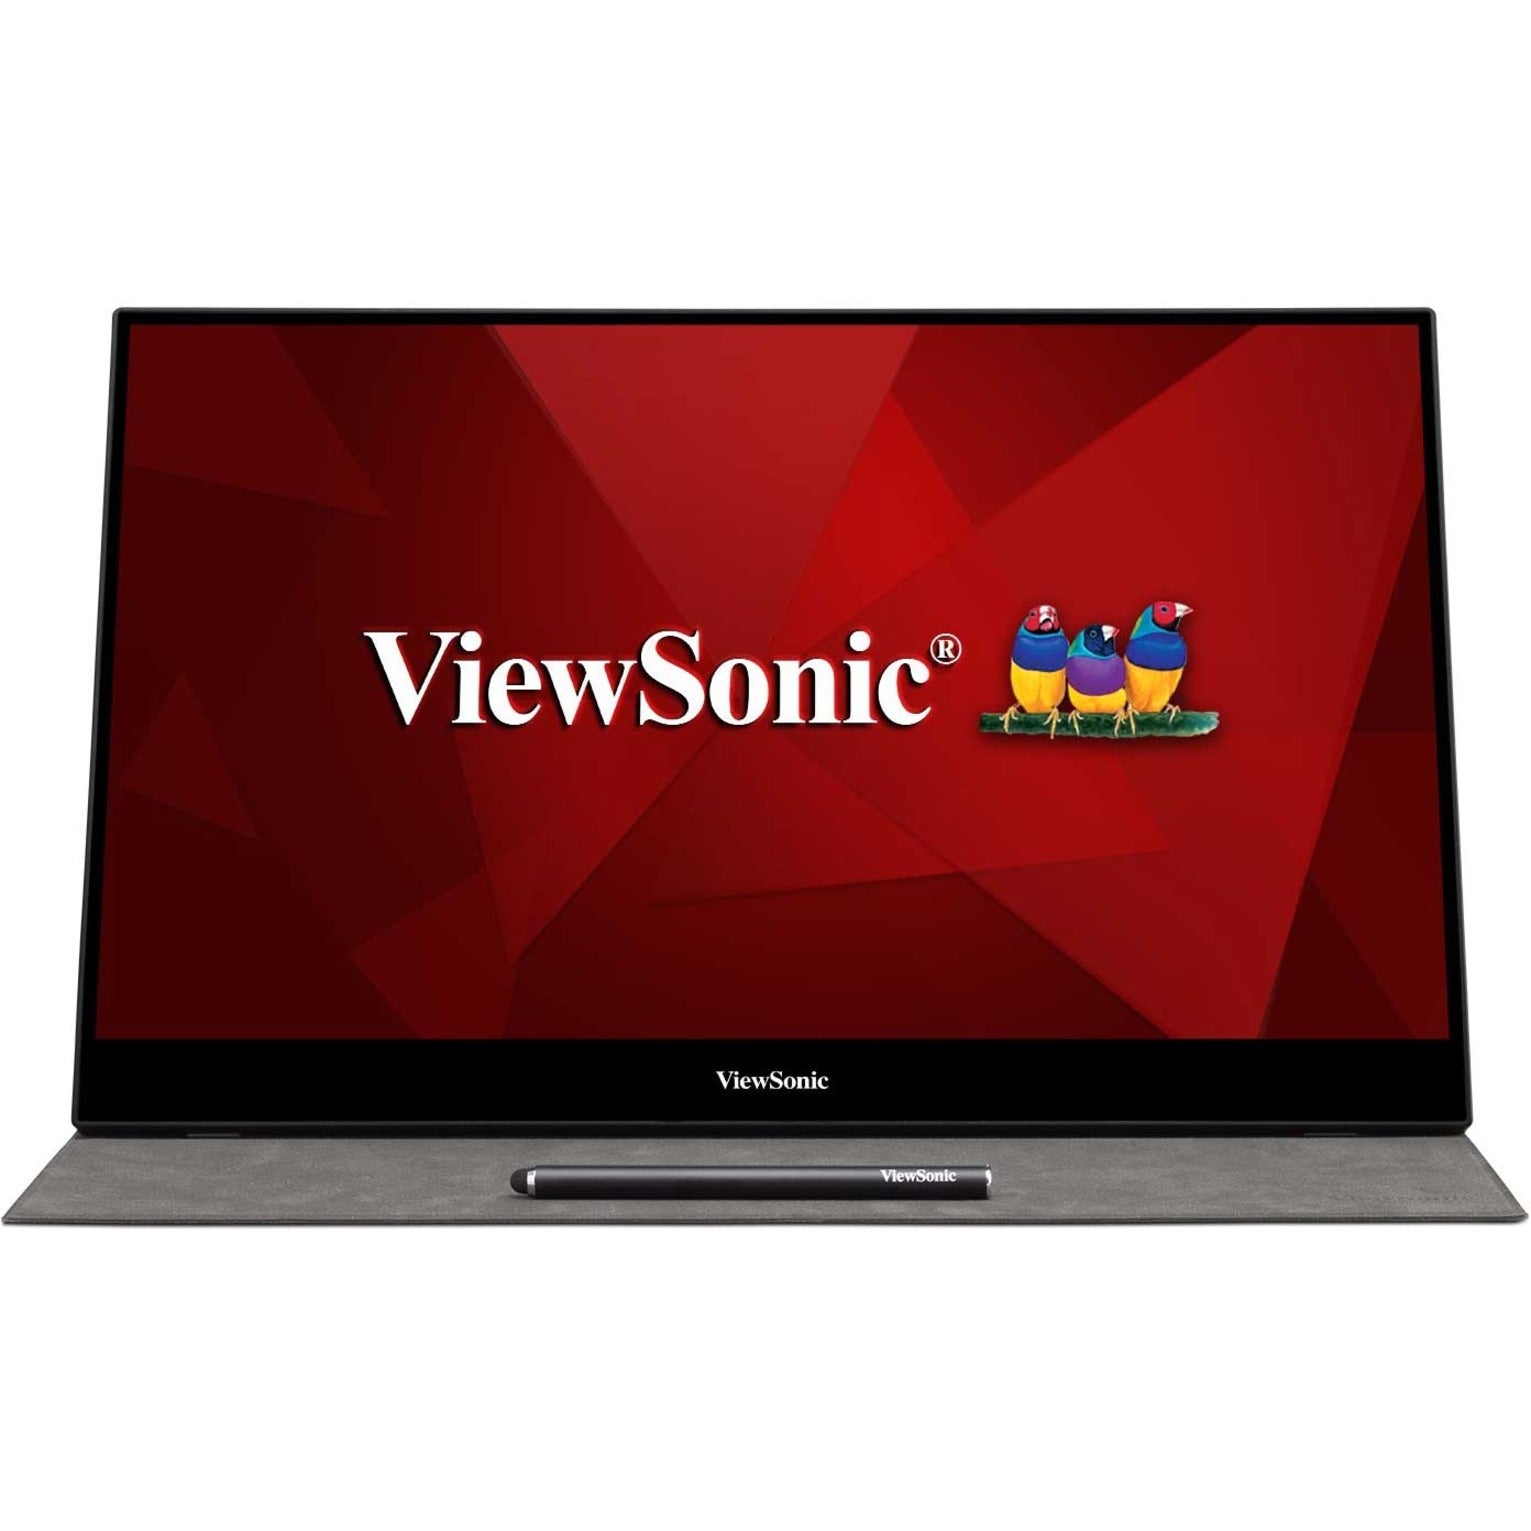 ViewSonic ID1655 ViewBoard Touch Display, 15.6" LCD Touch Monitor, 1920 x 1080 Resolution, 3 Year Warranty